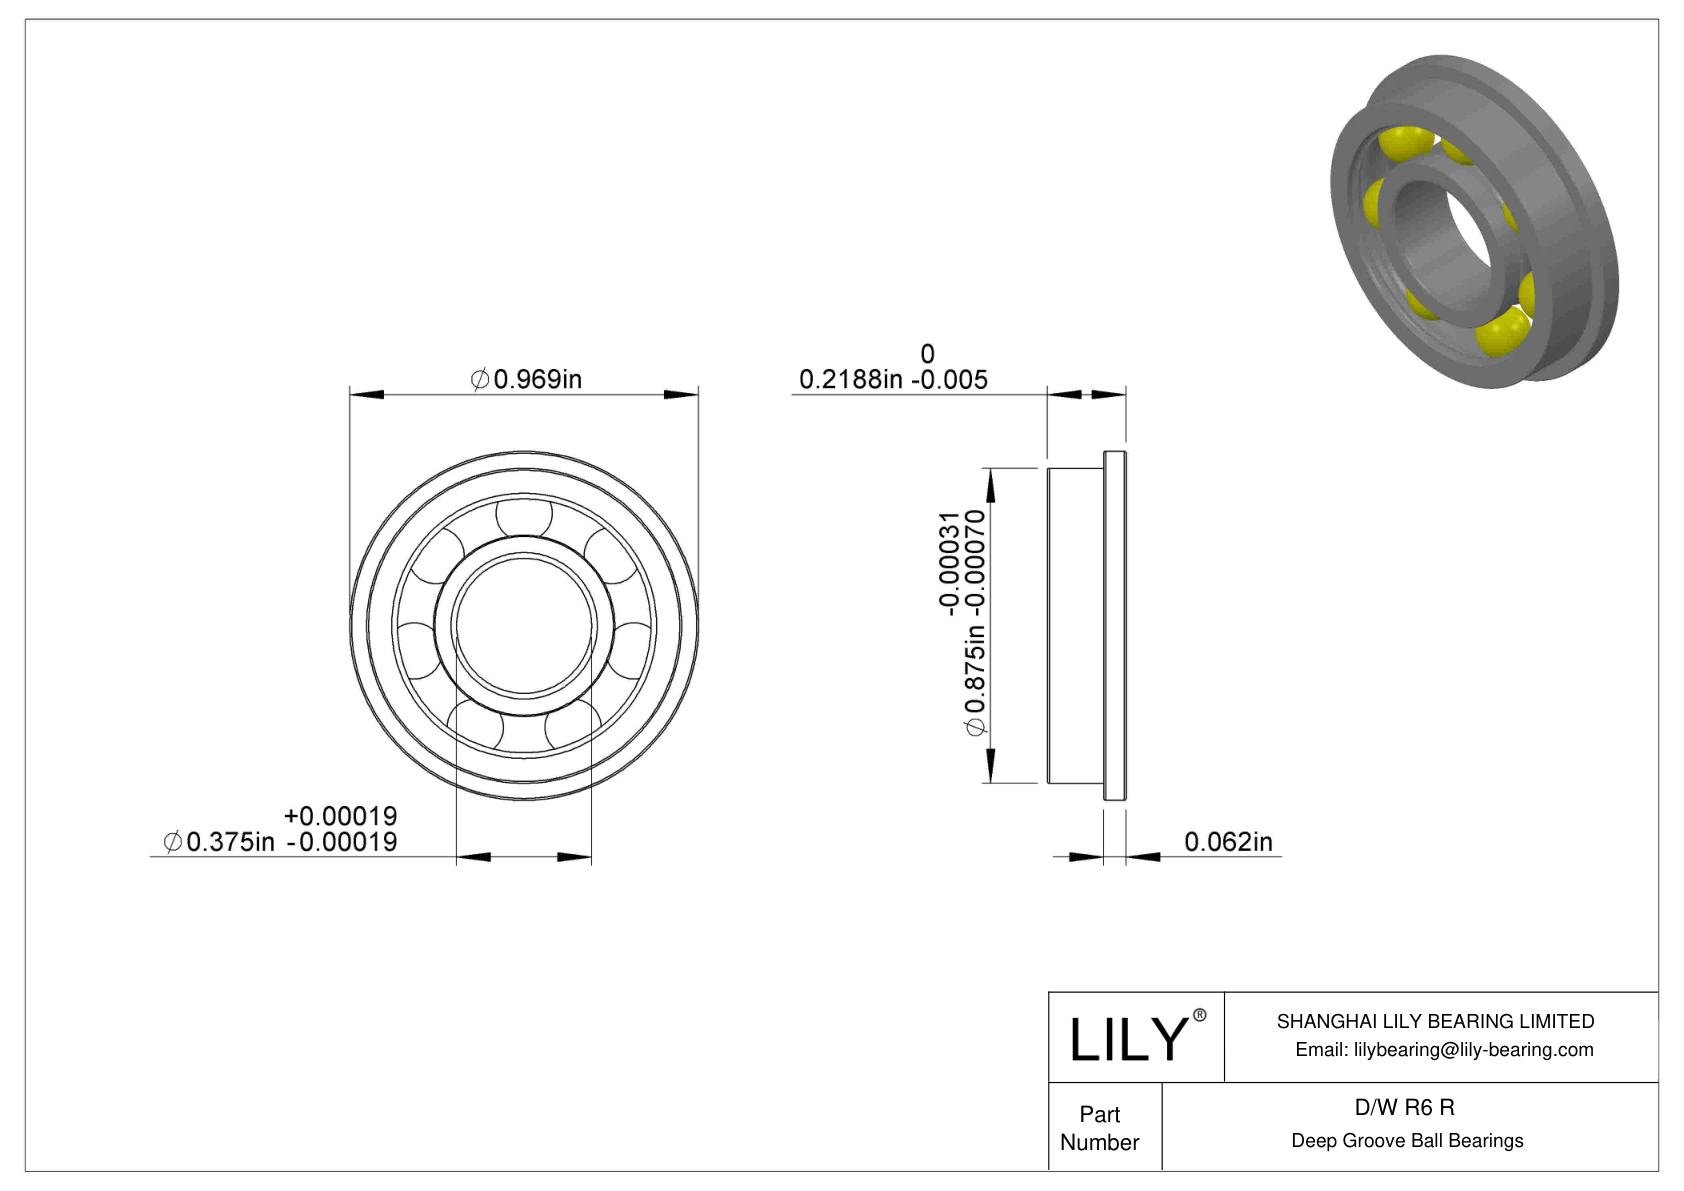 D/W R6 R Flanged Ball Bearings cad drawing